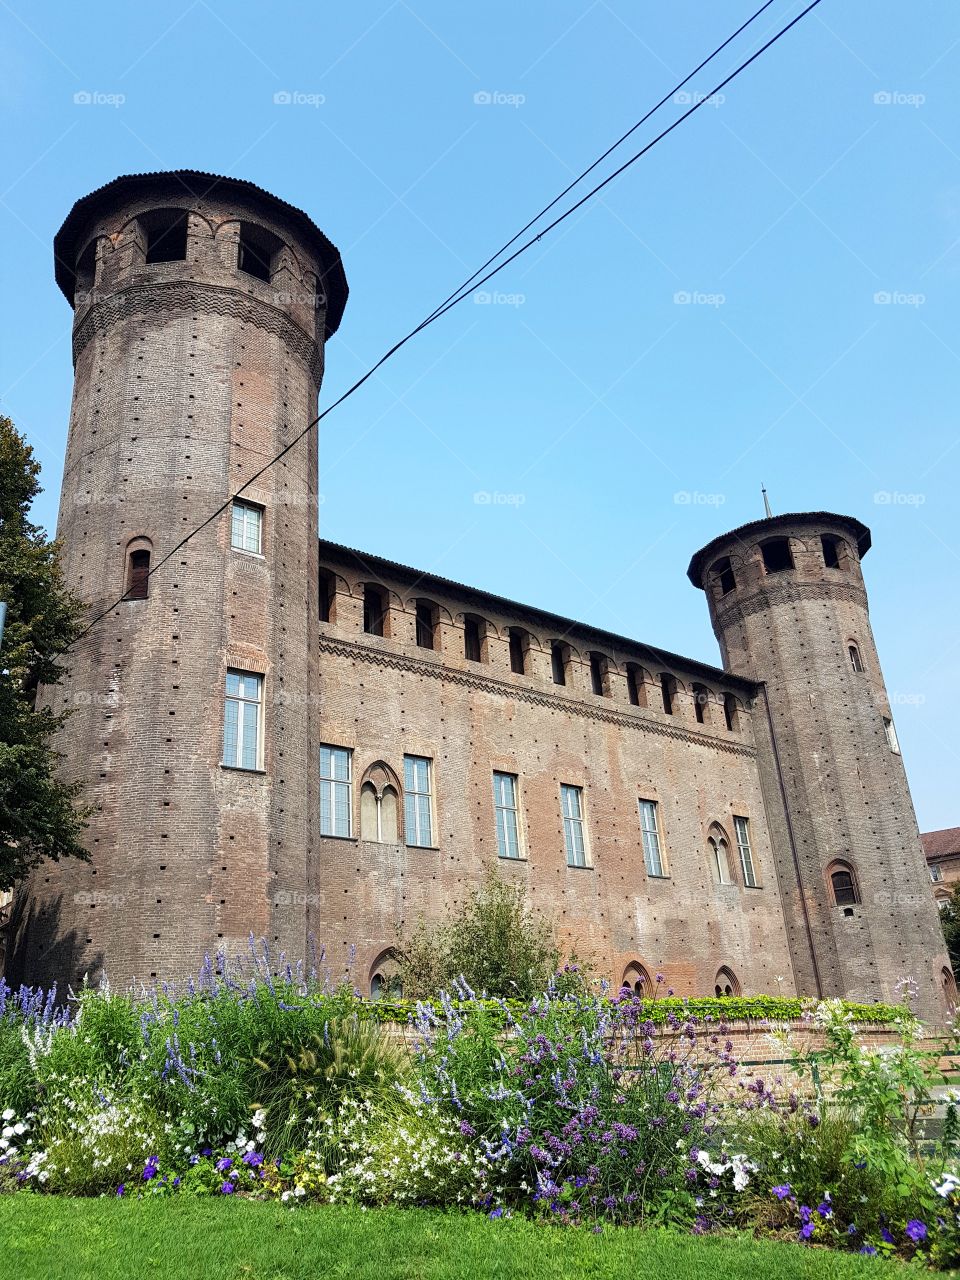 Ancient castle in the center of Turin in a sunny spring day